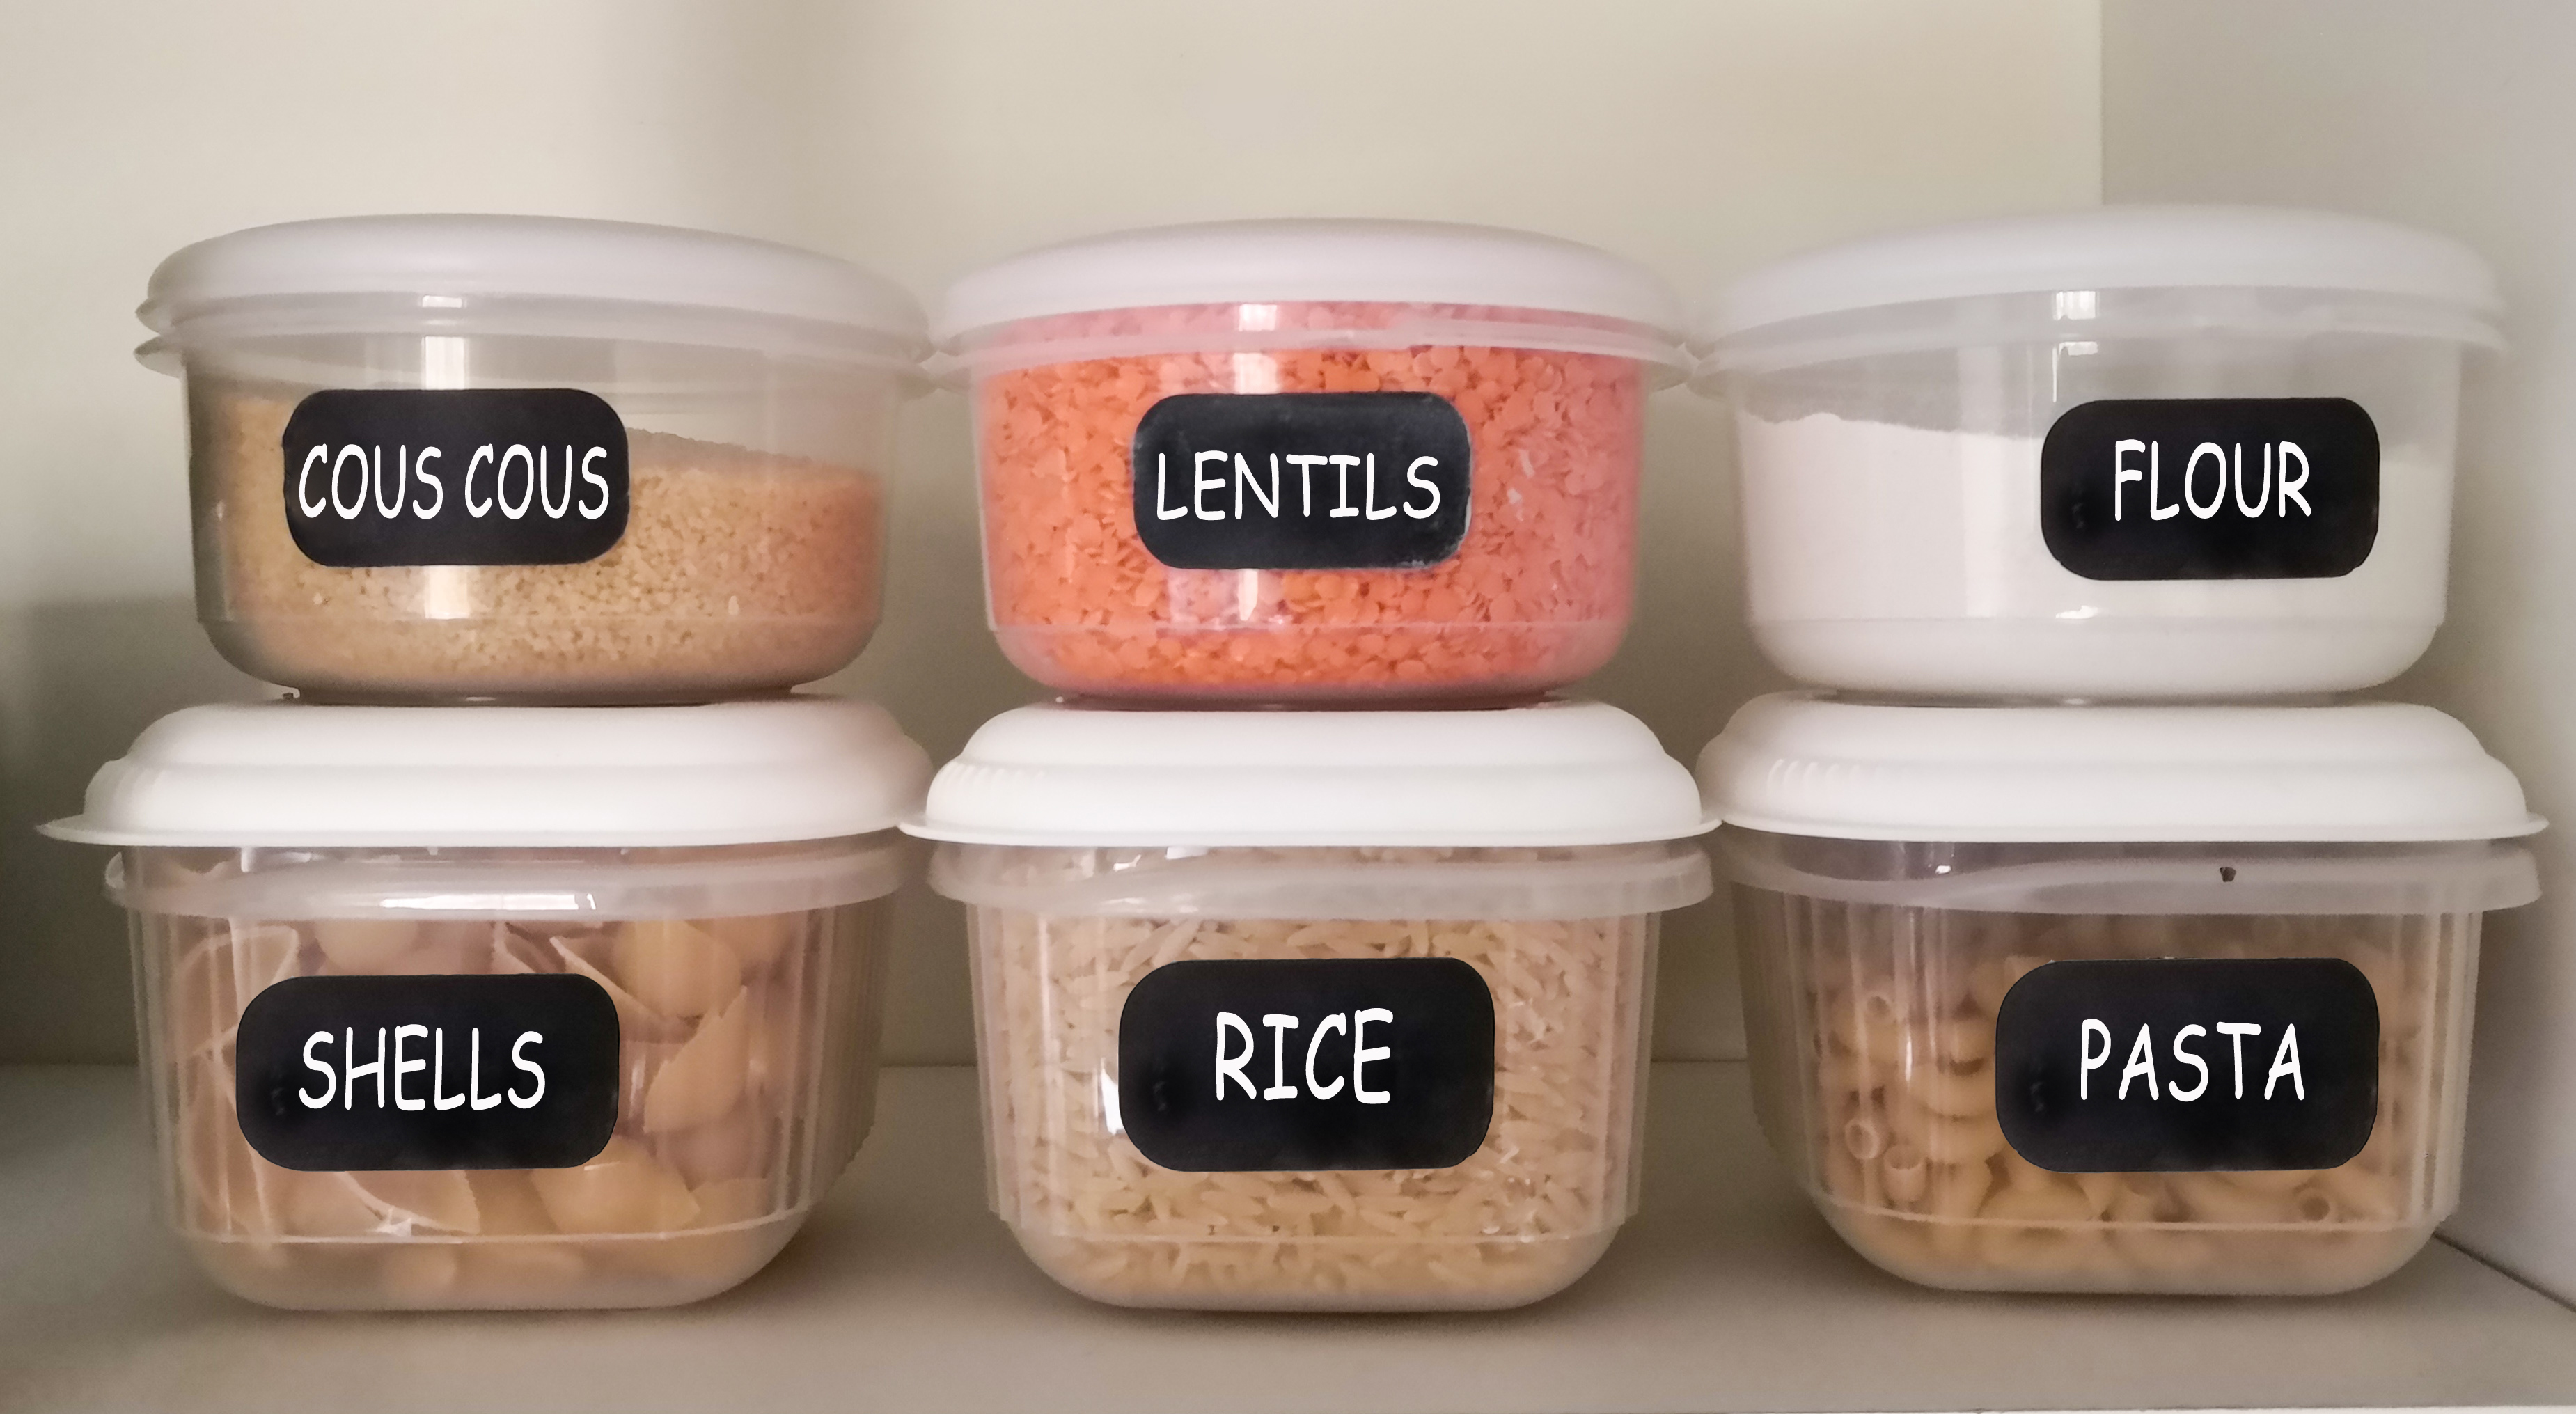 labeled food boxes in plastic containers in pantry